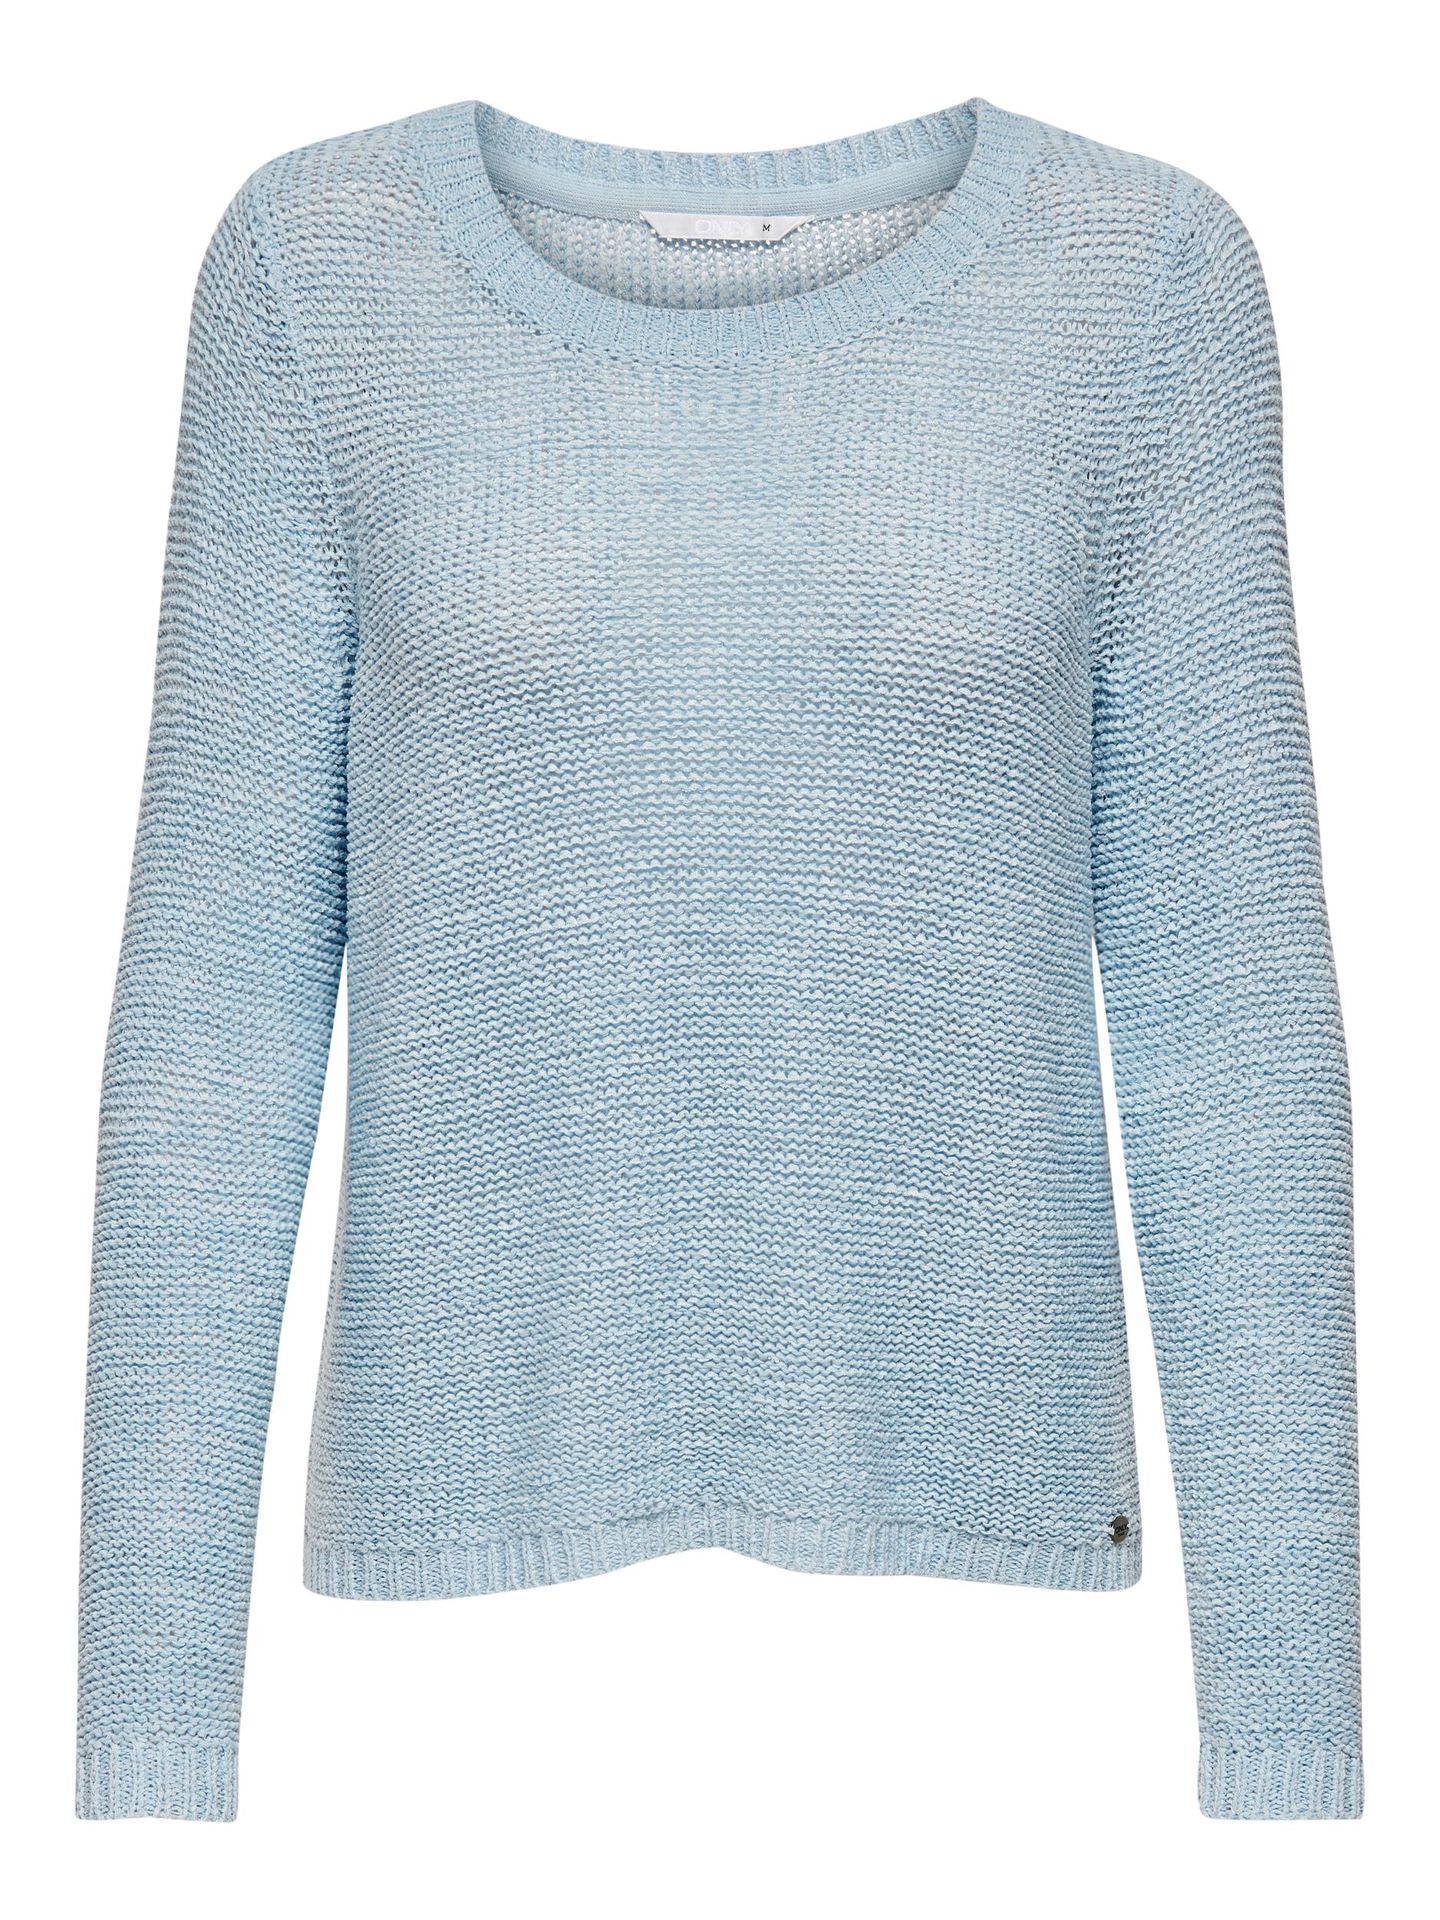 Only ONLGEENA XO L/S PULLOVER KNT NOOS Cashmere Blue 00102390-EKA26011400000118